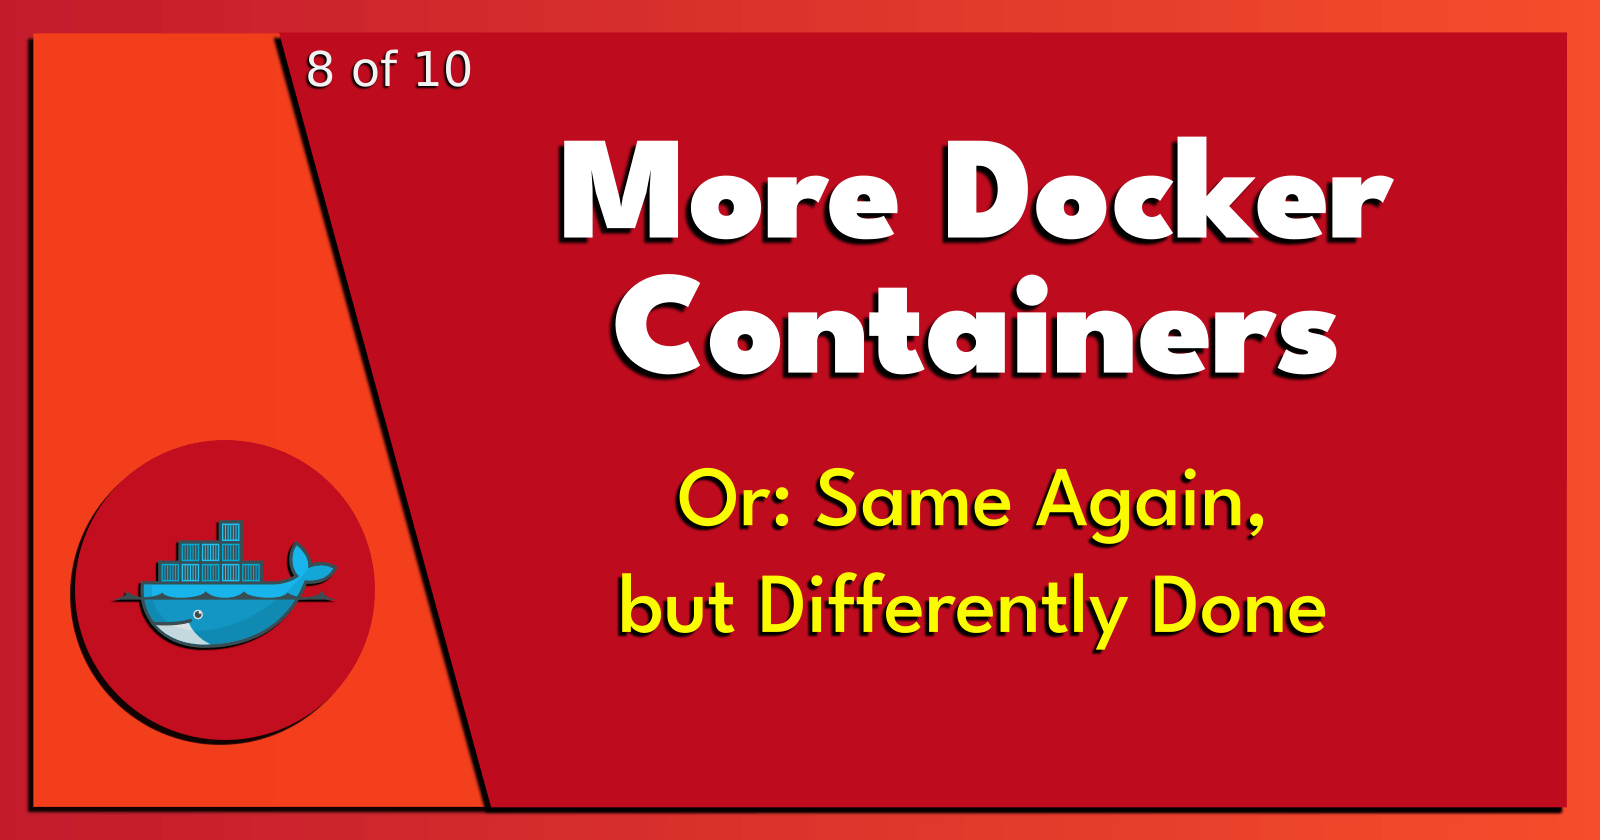 8 of 10: More Docker Containers.